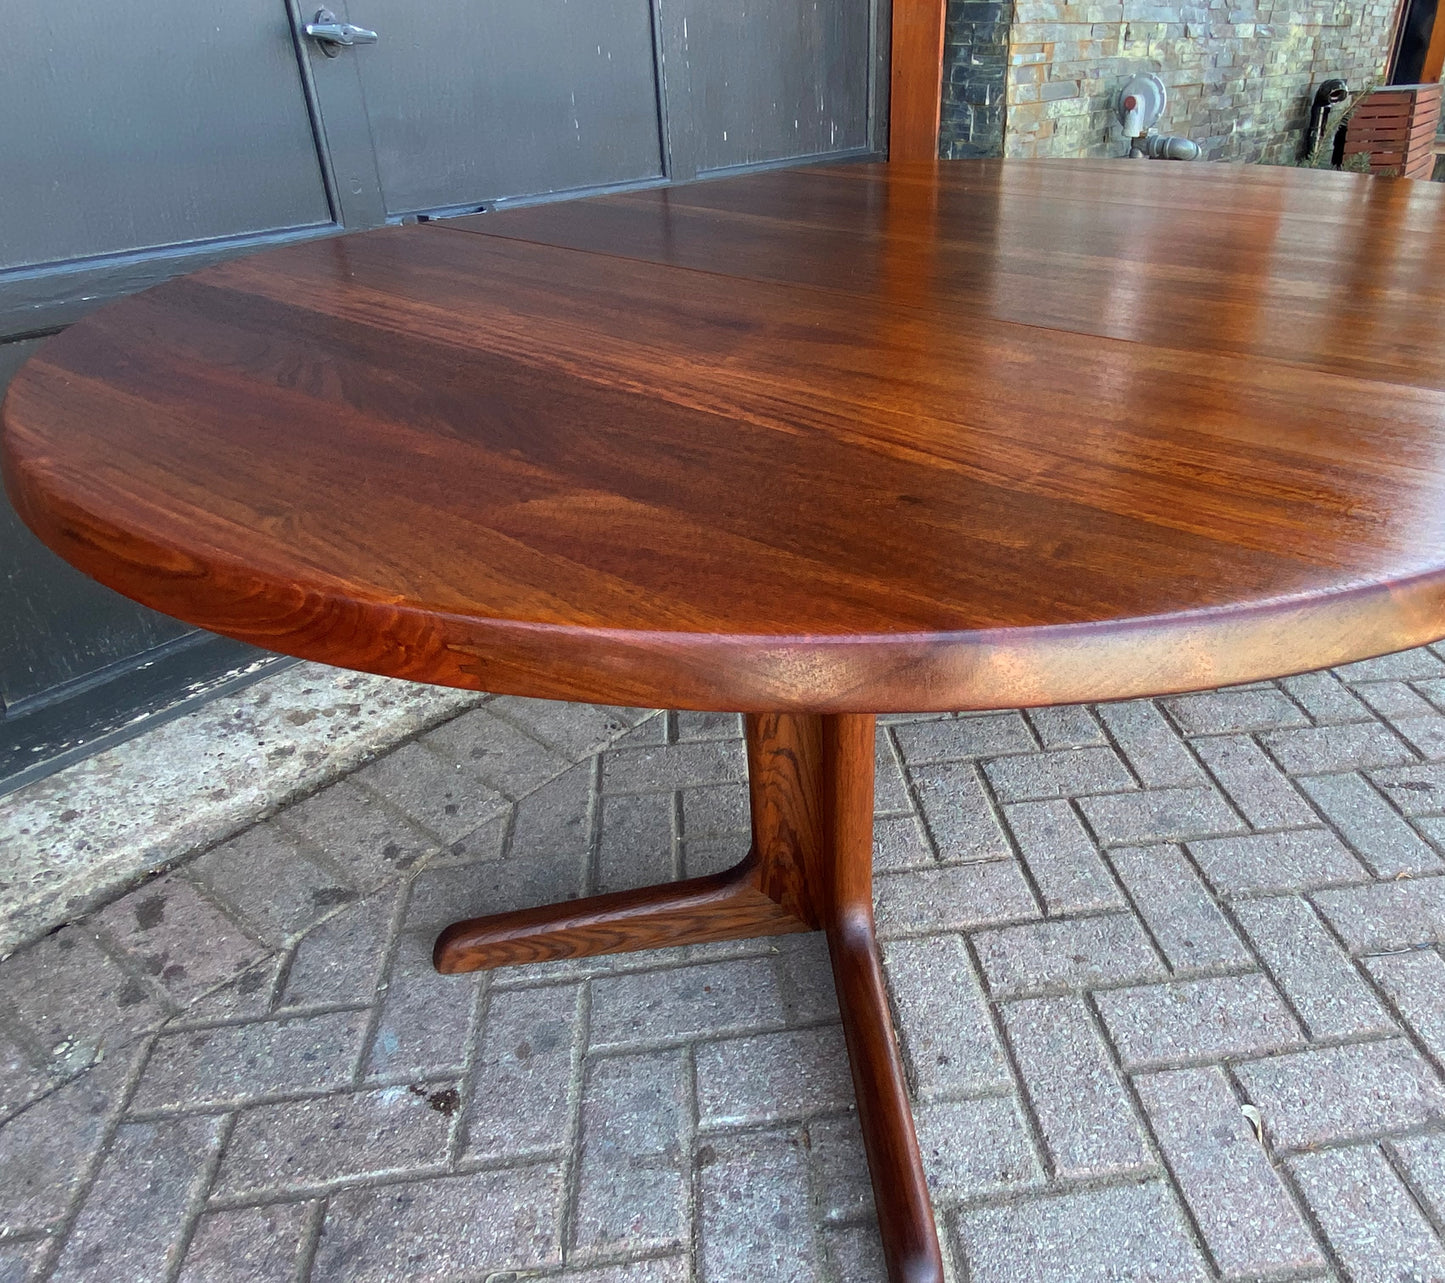 REFINISHED Rare MCM SOLID Rosewood Table Round w 1 Leaf 47" - 72" PERFECT